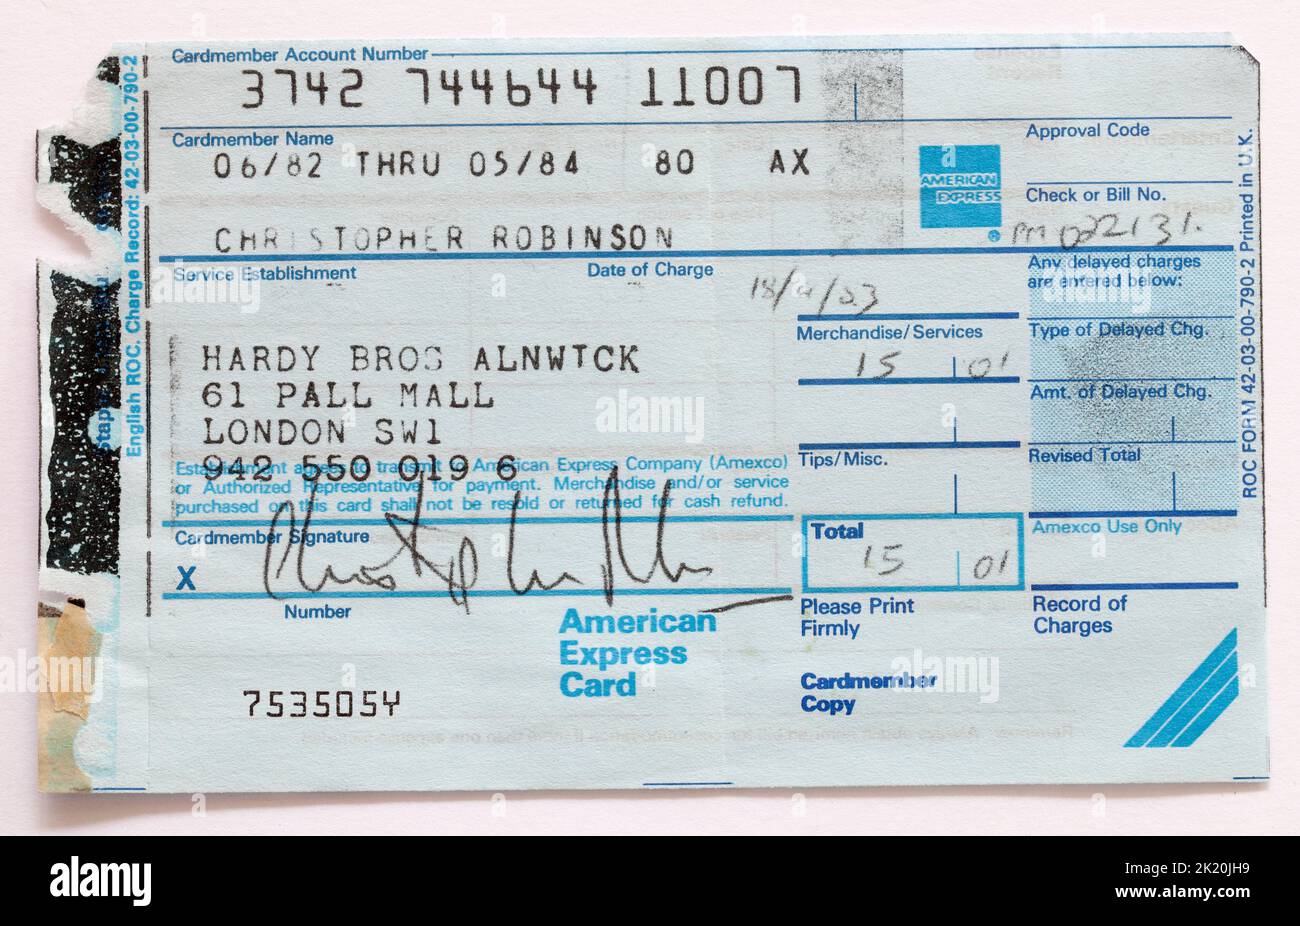 1980s American Express Card Payment Receipt for Clothing Purchase from Hardy Bros Pall Mall London Stock Photo